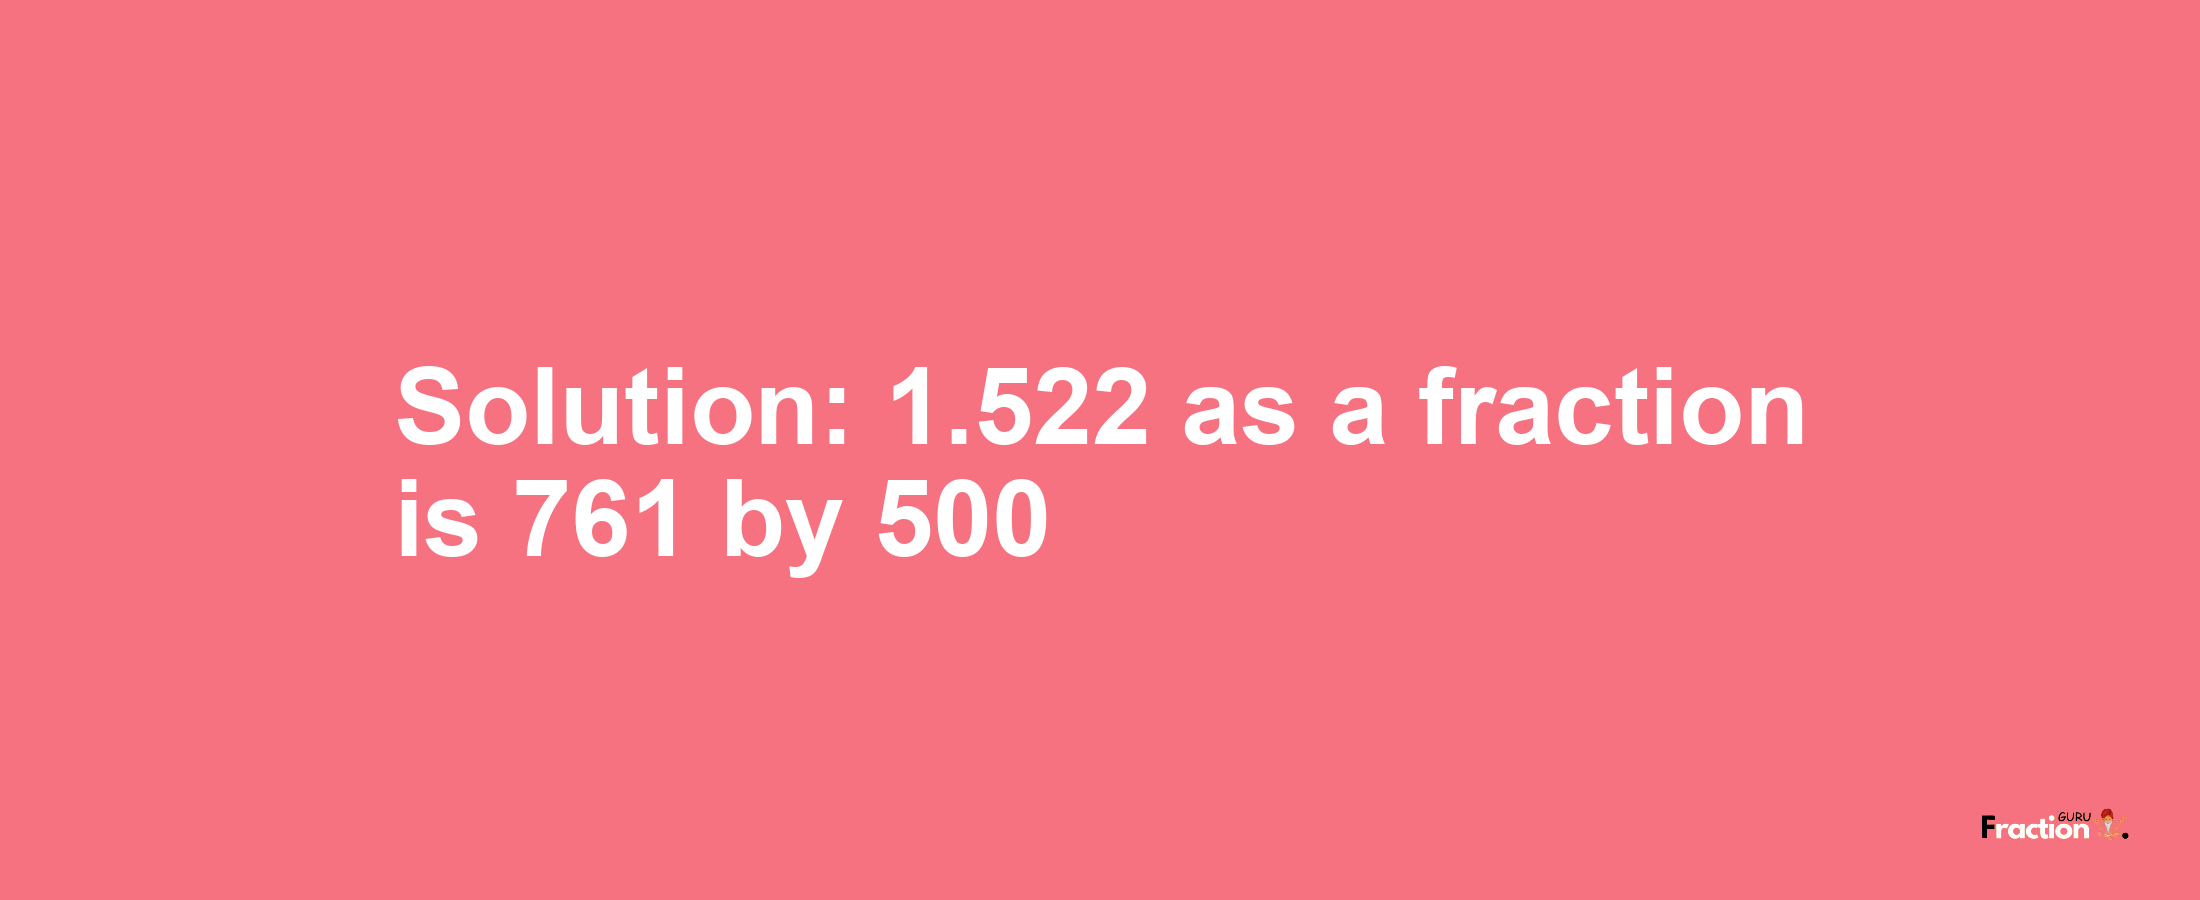 Solution:1.522 as a fraction is 761/500